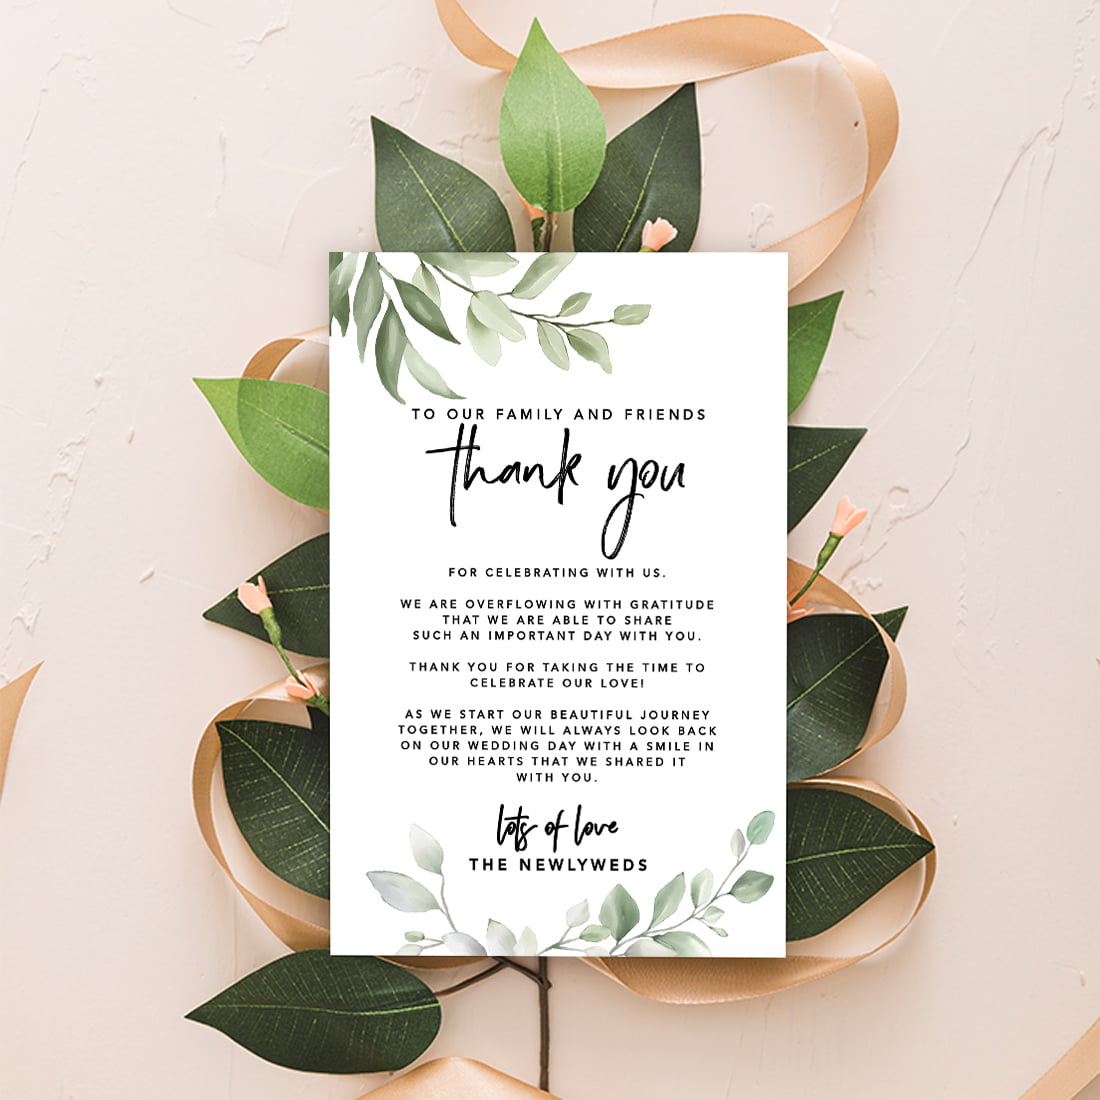 Details about   NEW Thank You Silver Scroll Landscape Cards Envelopes Wedding Party 